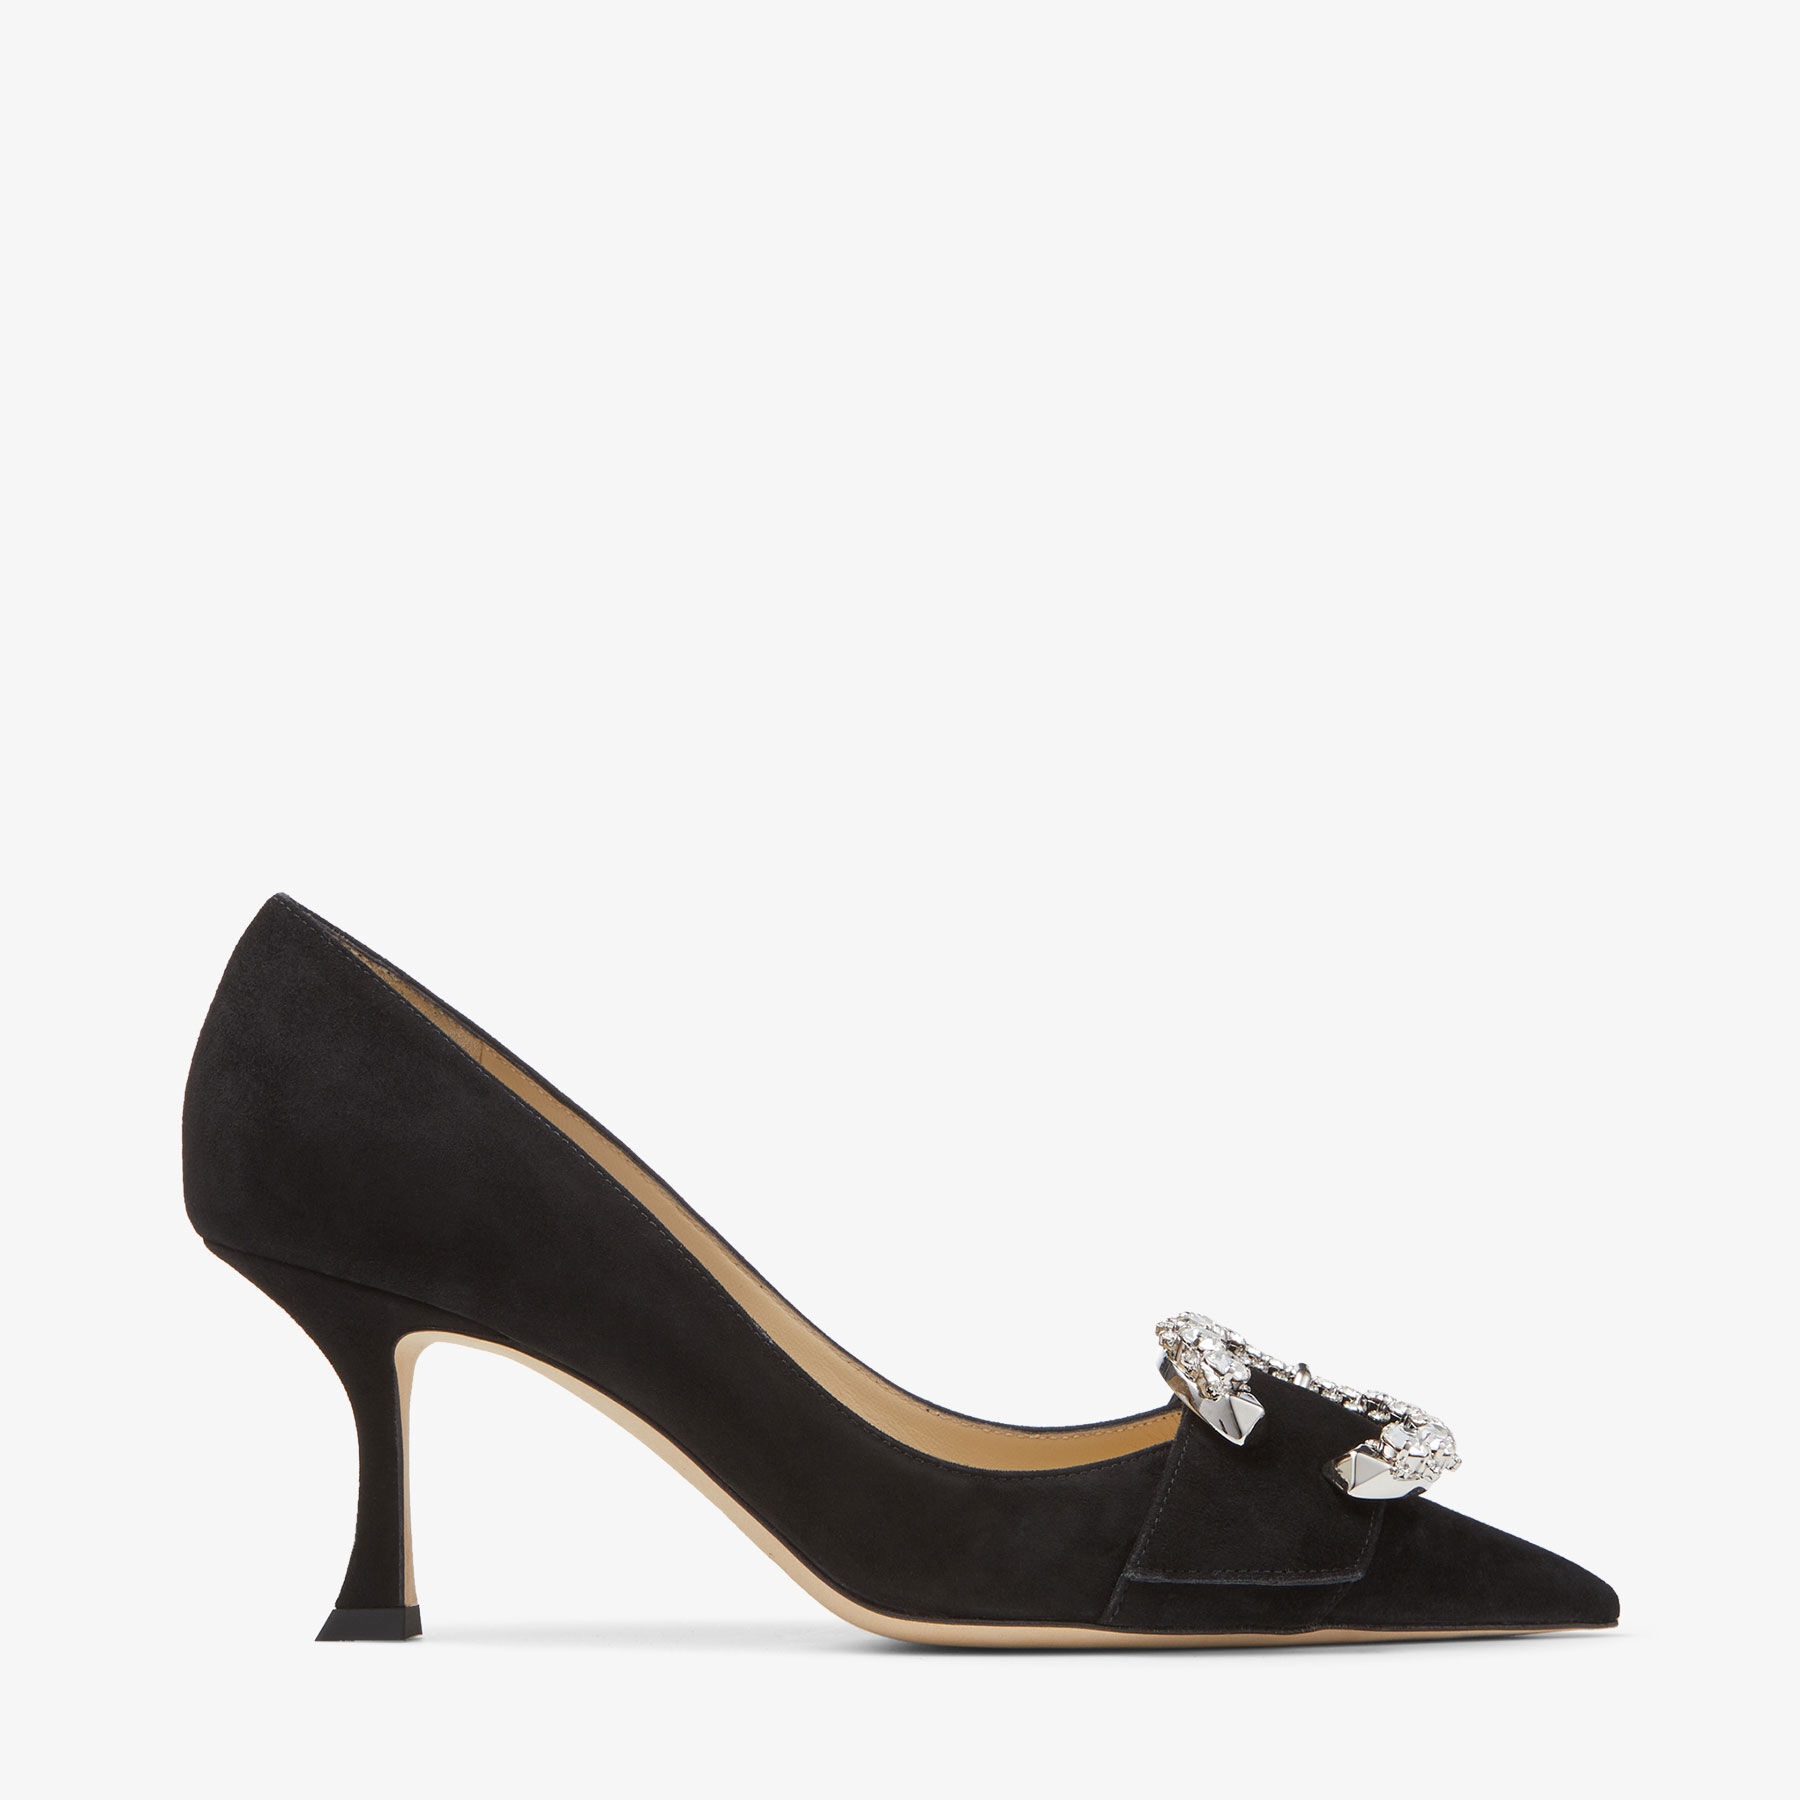 Melva 70
Black Suede Pointed-Toe Pumps with Crystal Buckle - 1